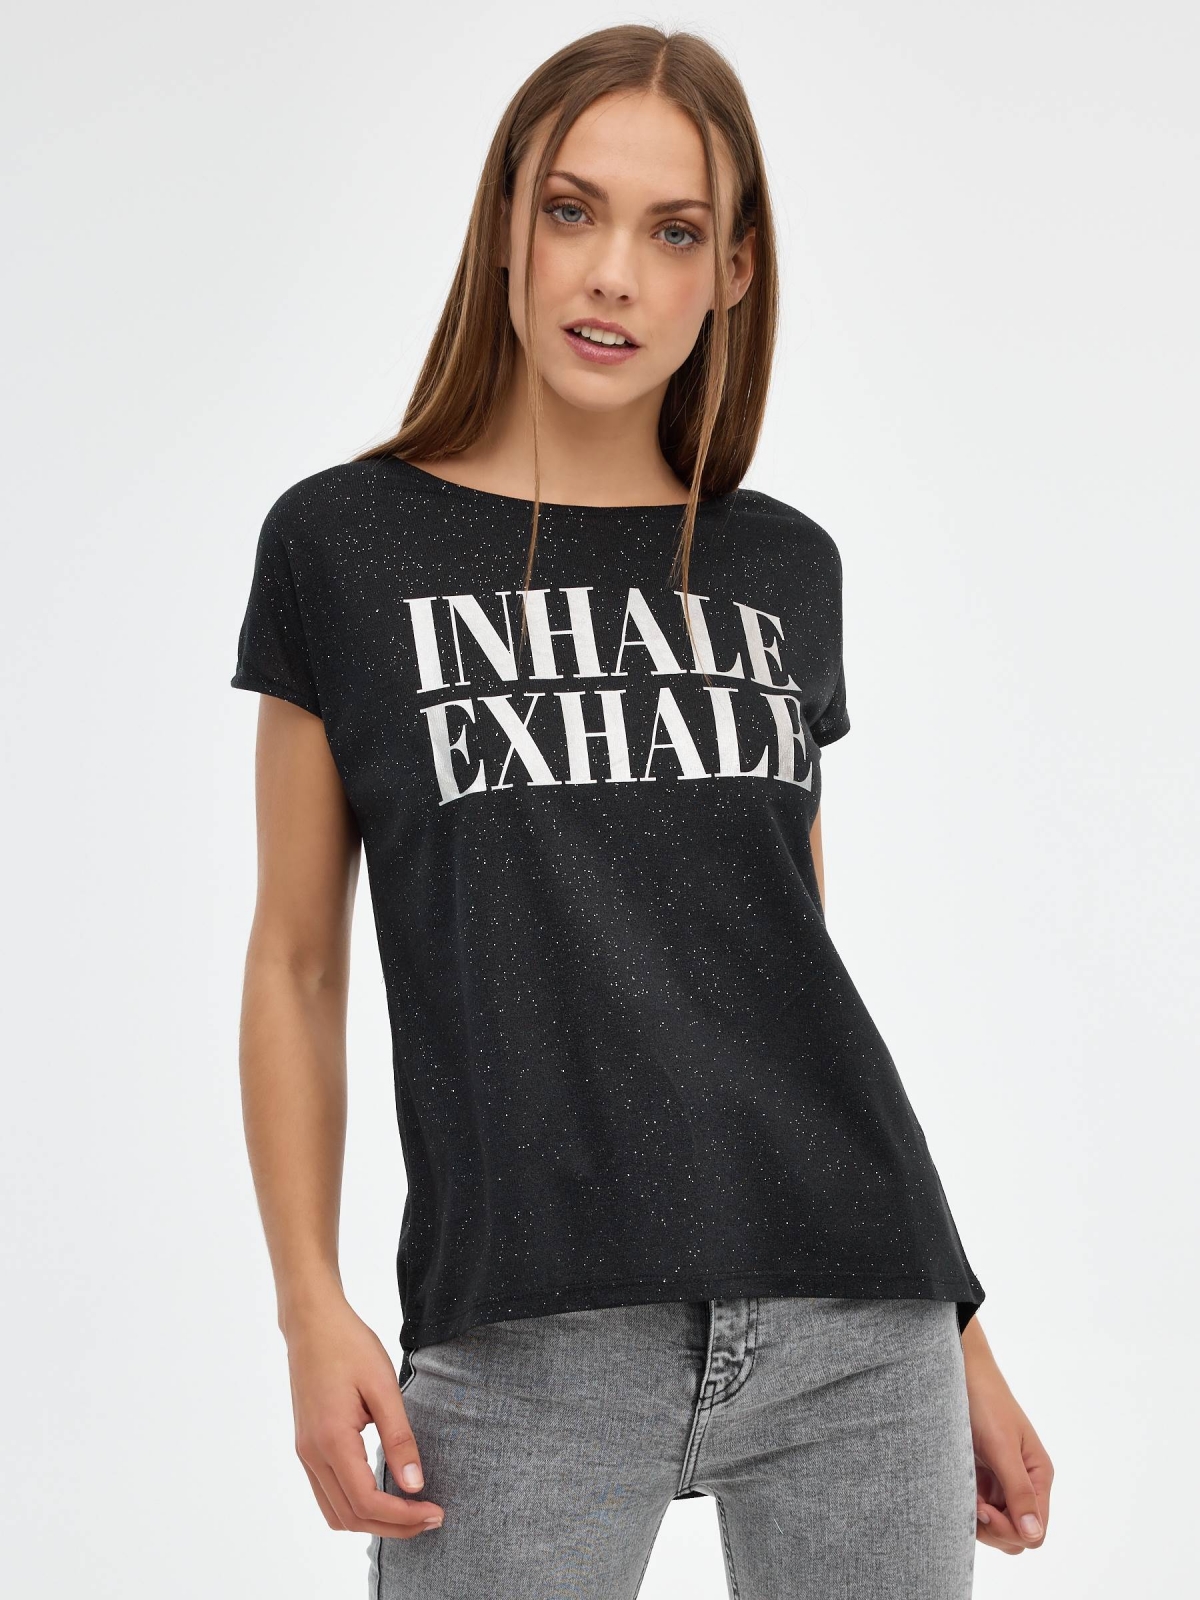 Inhale Exhale Shirt black middle front view